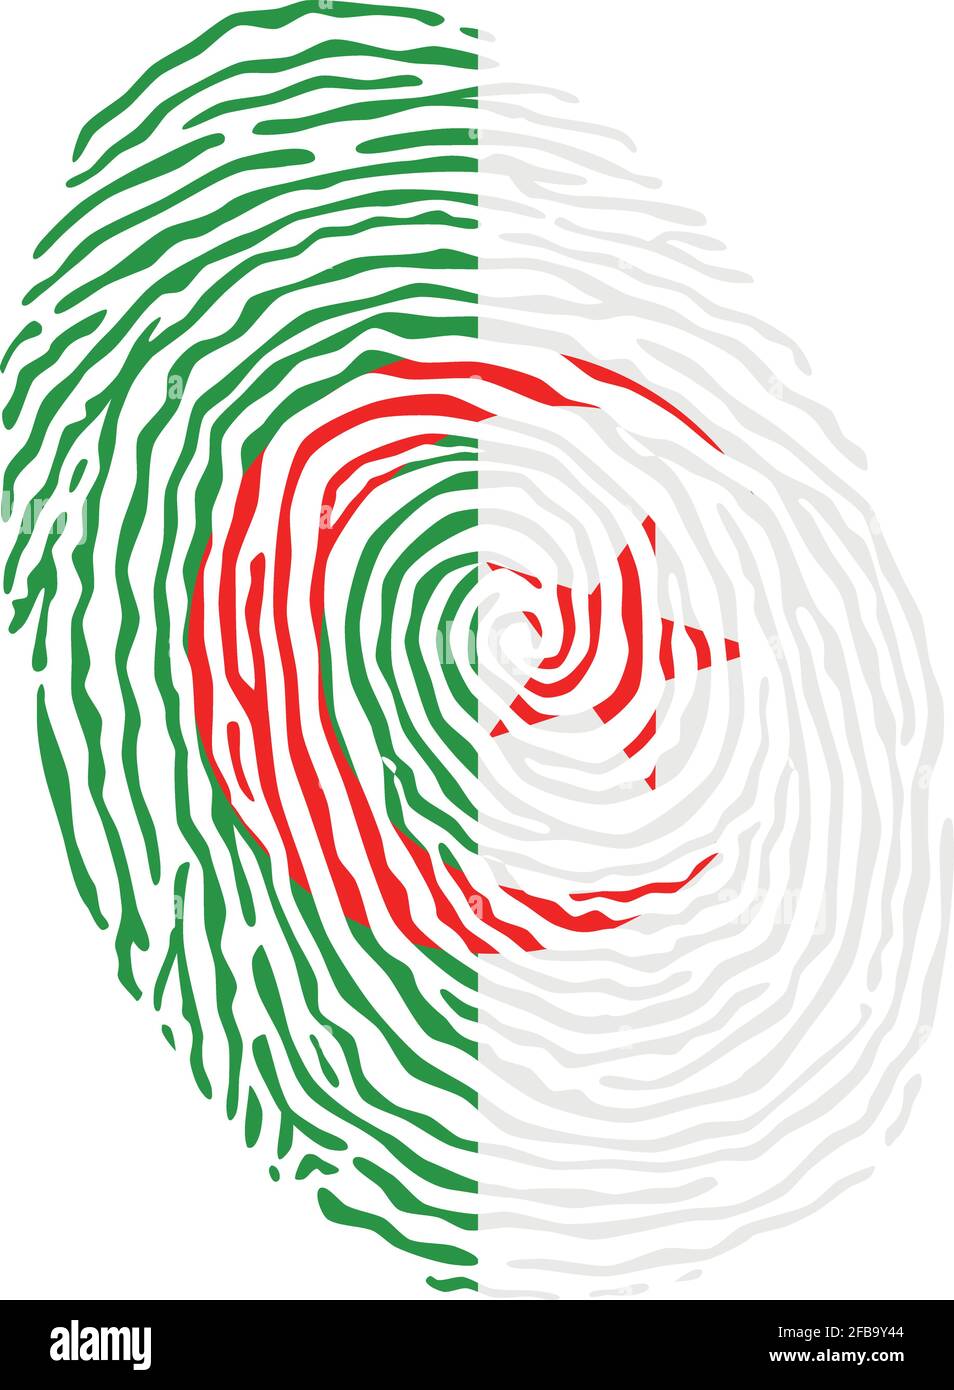 Fingerprint vector colored with the national flag of Algeria Stock Vector